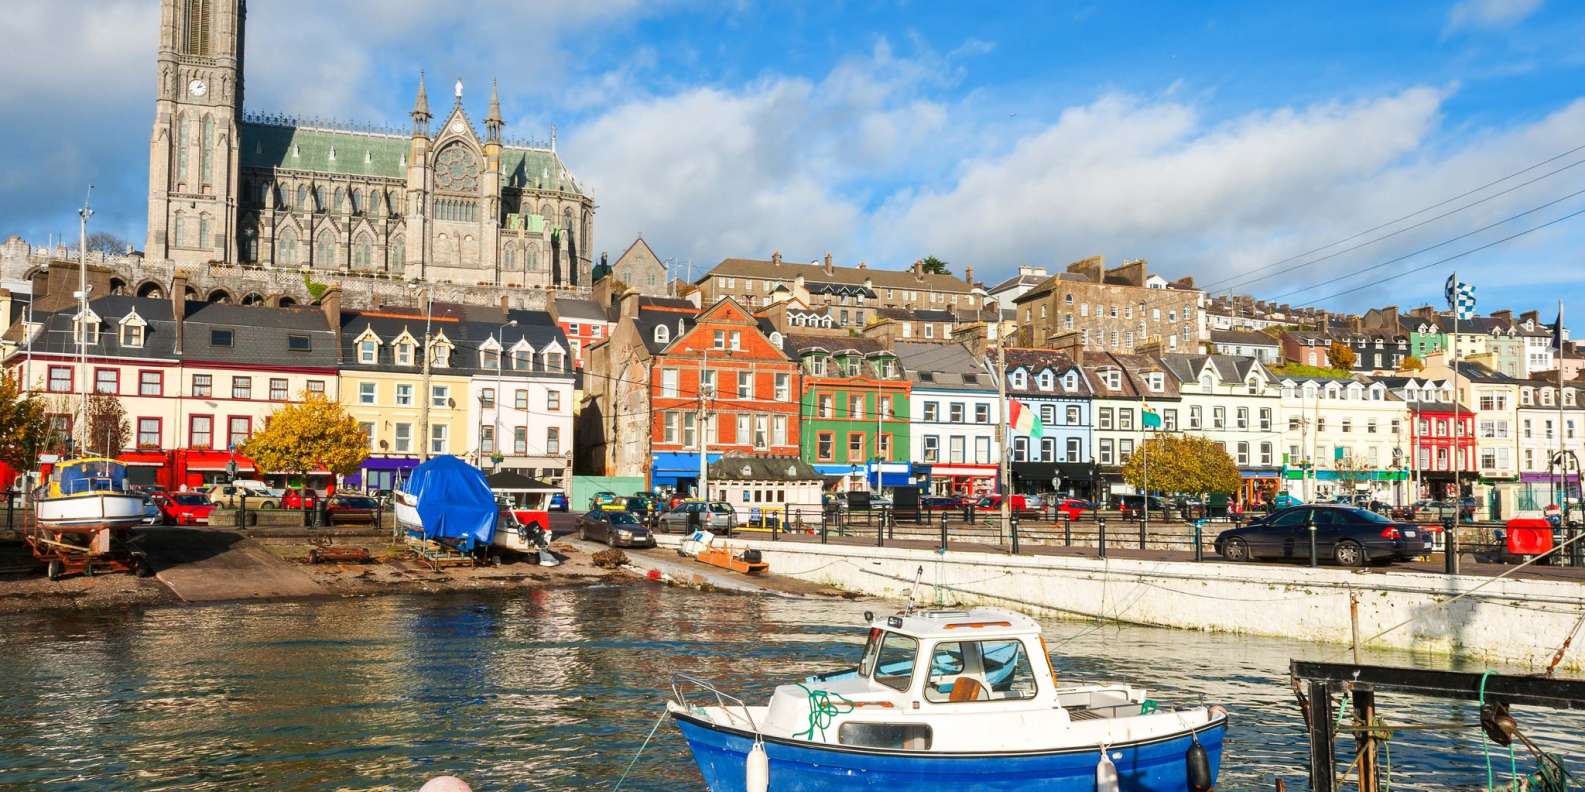 The BEST Cork Culture & history 2023 FREE Cancellation GetYourGuide